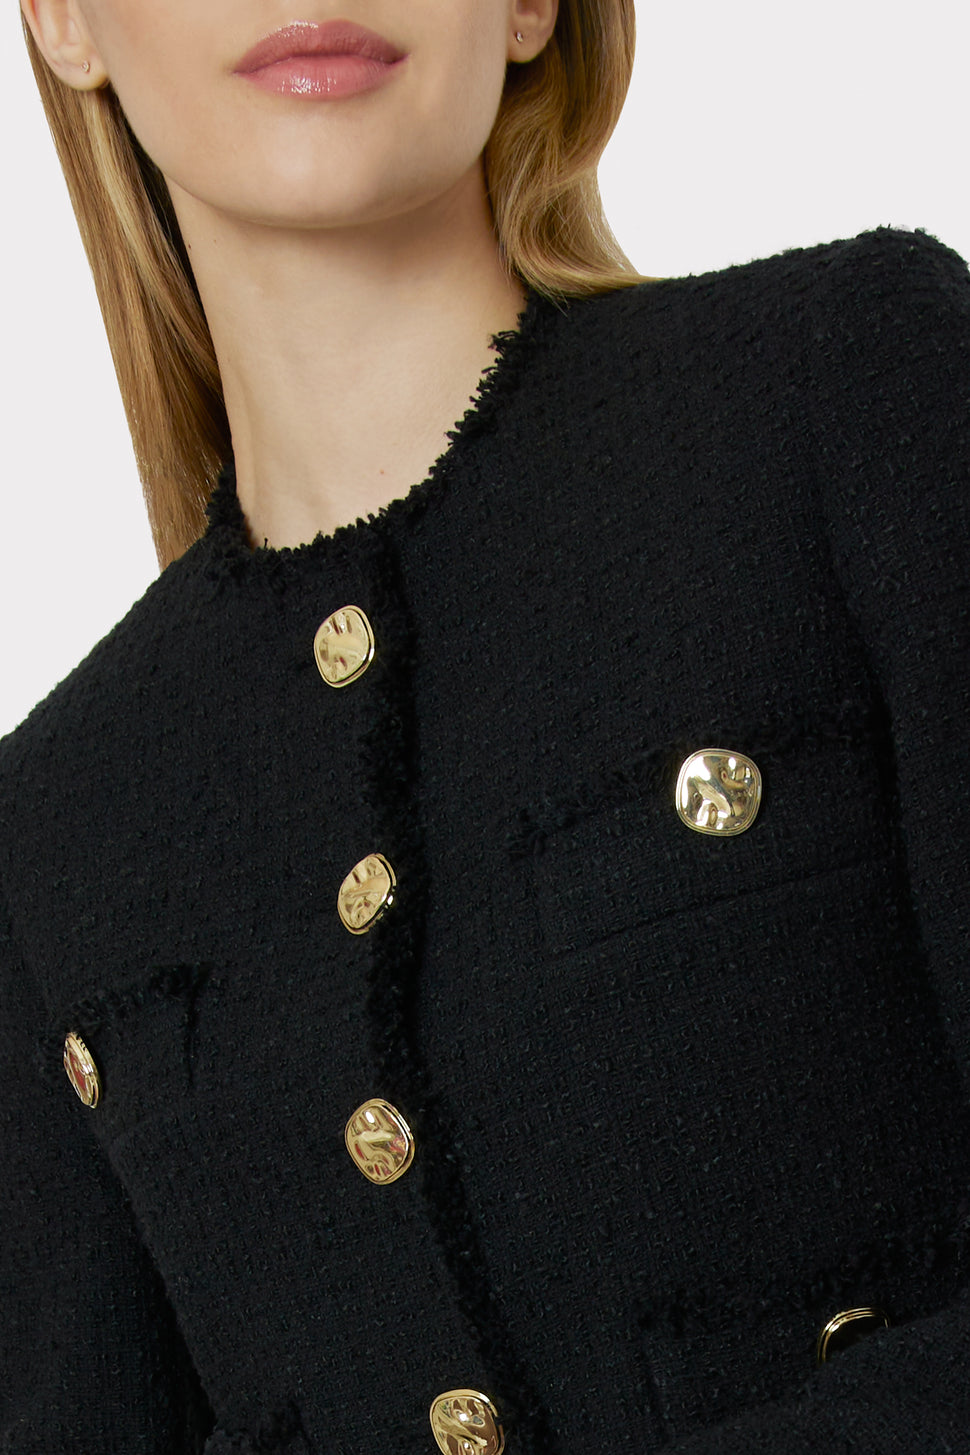 Reign Boucle Jacket in Black - MILLY in Black